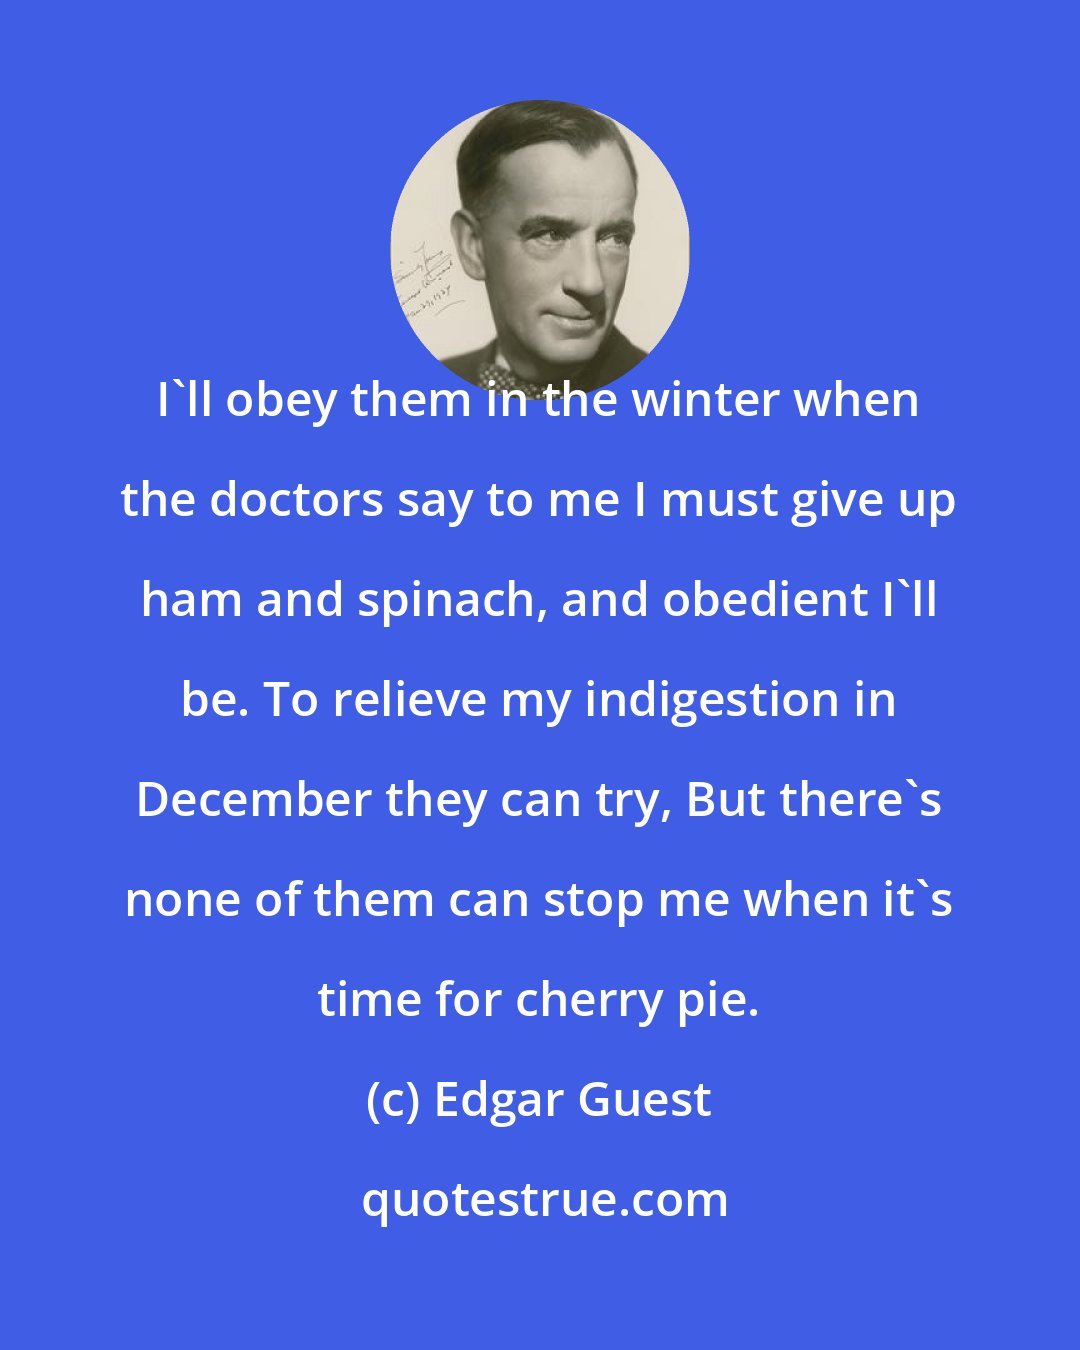 Edgar Guest: I'll obey them in the winter when the doctors say to me I must give up ham and spinach, and obedient I'll be. To relieve my indigestion in December they can try, But there's none of them can stop me when it's time for cherry pie.